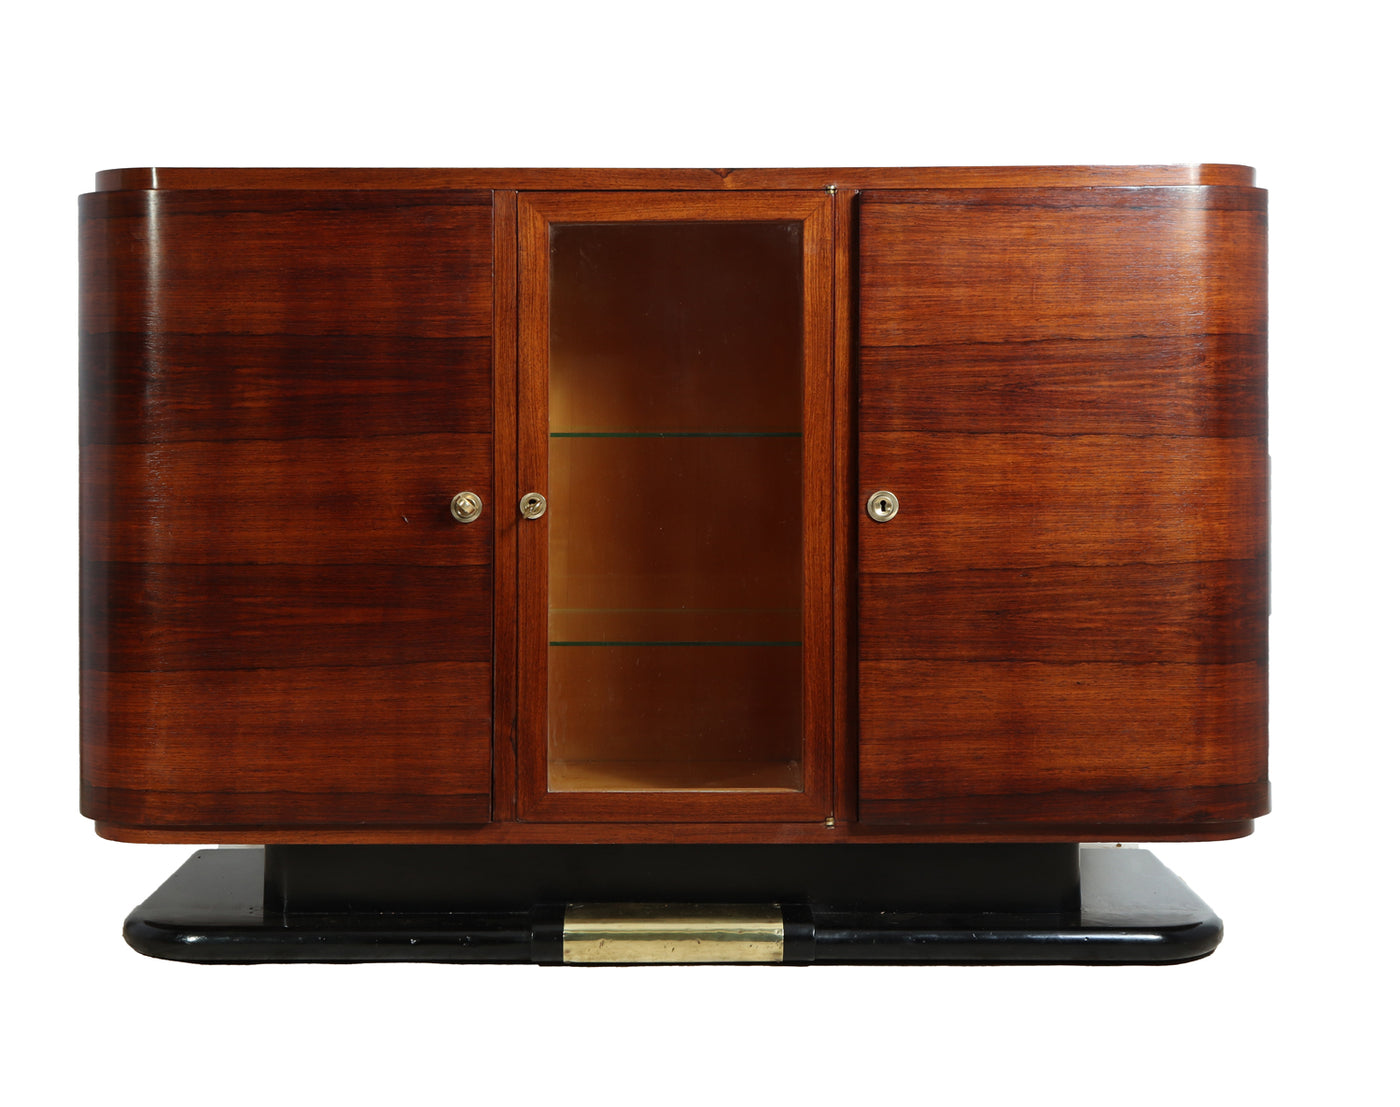 French Art Deco Sideboard in Rosewood